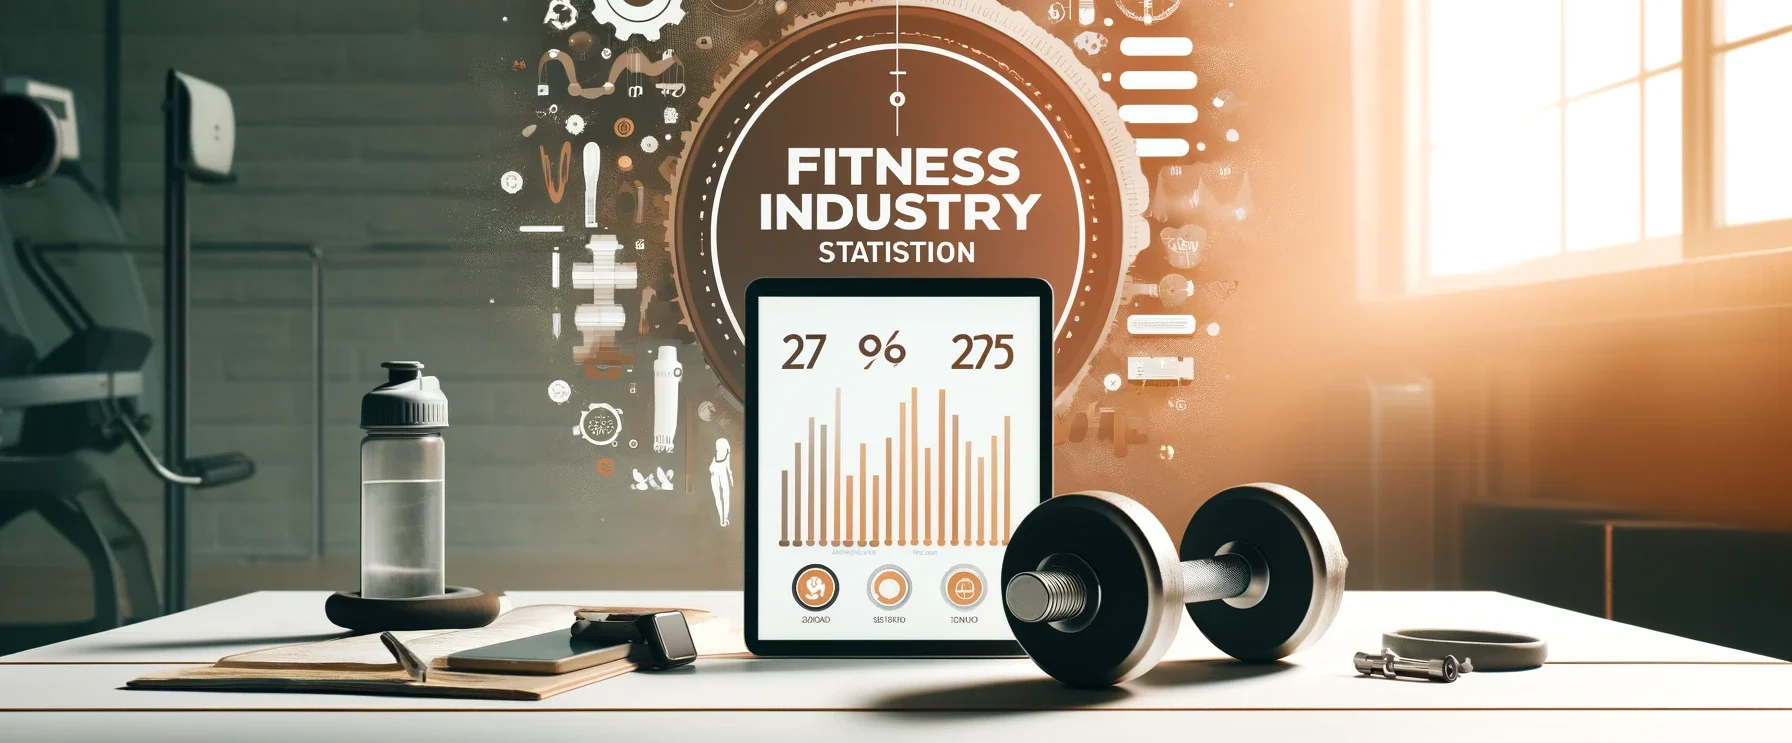 Fitness Industry Statistics By Gymgoer’s Behaviour, Online Fitness Training, Revenue, Market Share, Race/Ethnicity And Generation